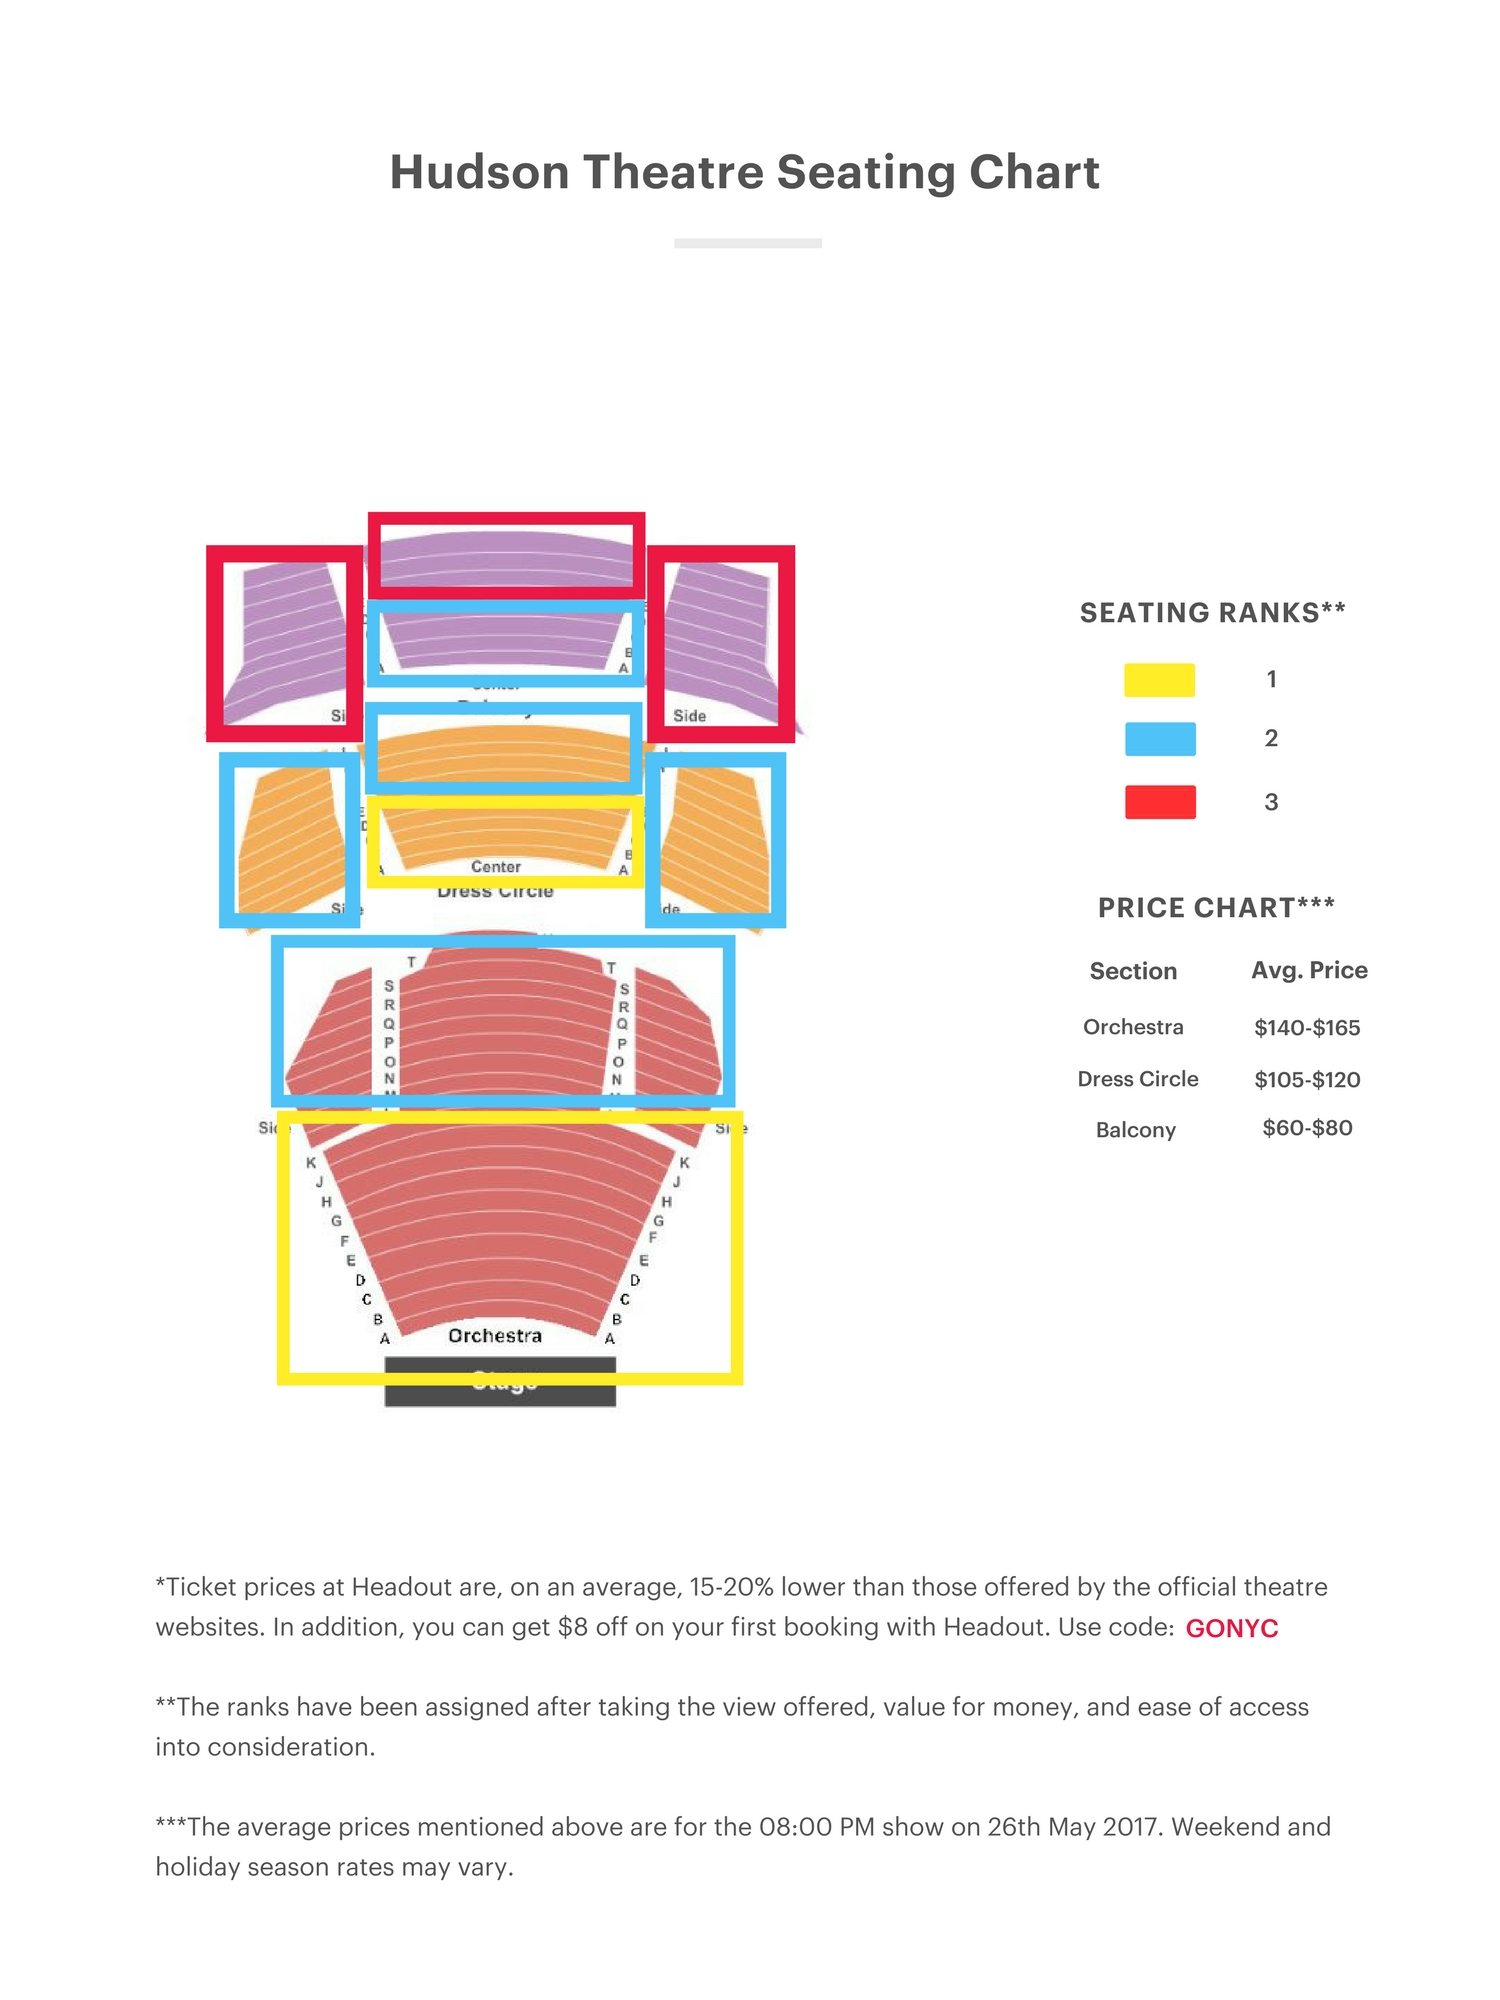 Hudson Theater Seating Chart